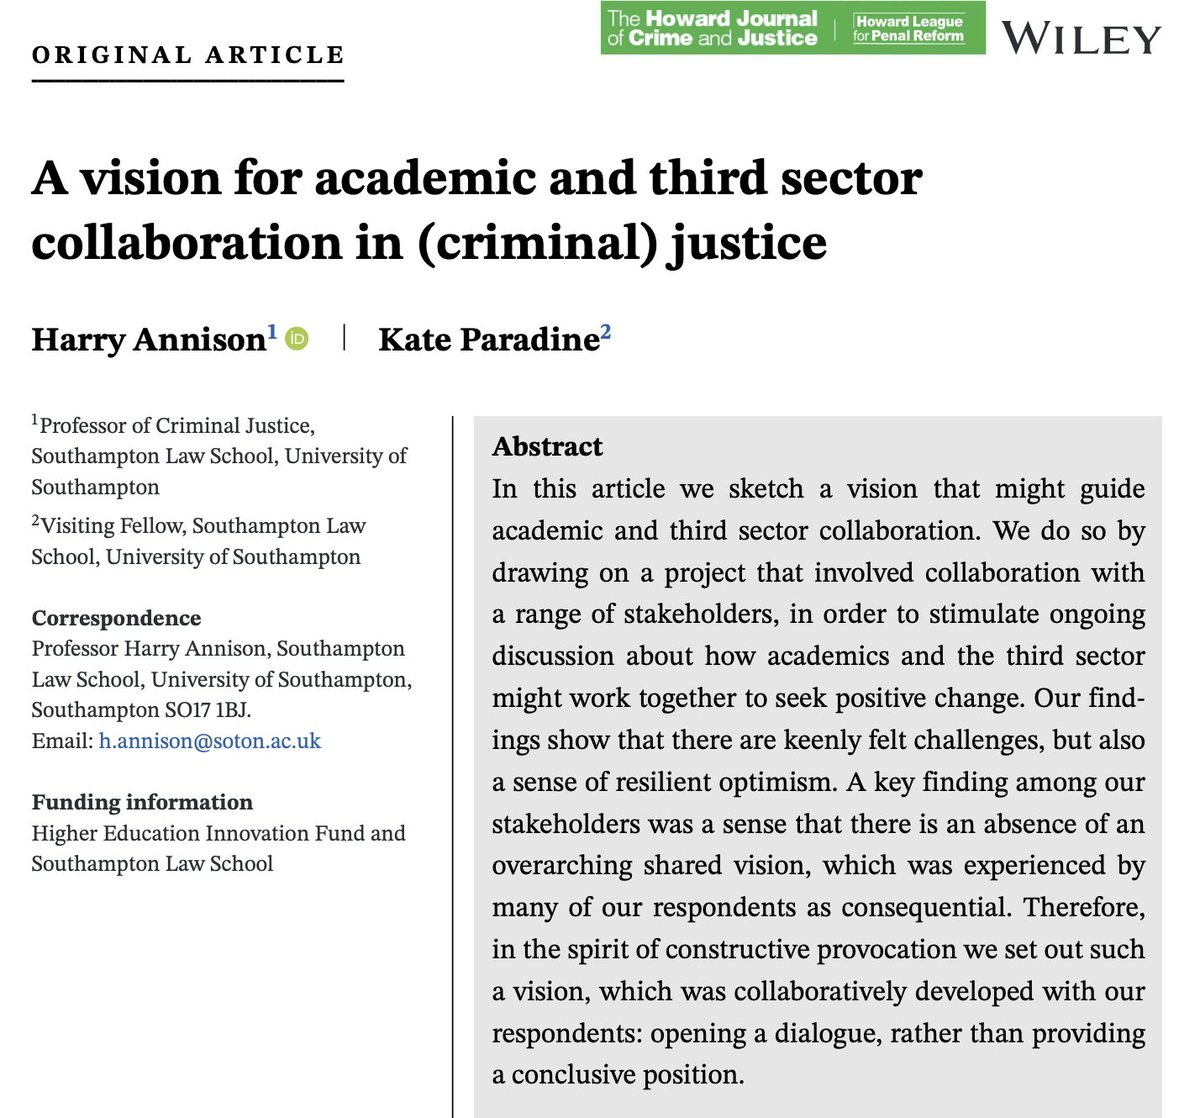 New paper! @klparadine and I sketch a vision for academic and third sector collaboration. It's open access (free). See what you make of it... onlinelibrary.wiley.com/doi/epdf/10.11… This builds on our earlier ‘Growing Hope and Power’ briefing, available here southampton.ac.uk/publicpolicy/s… 1/2